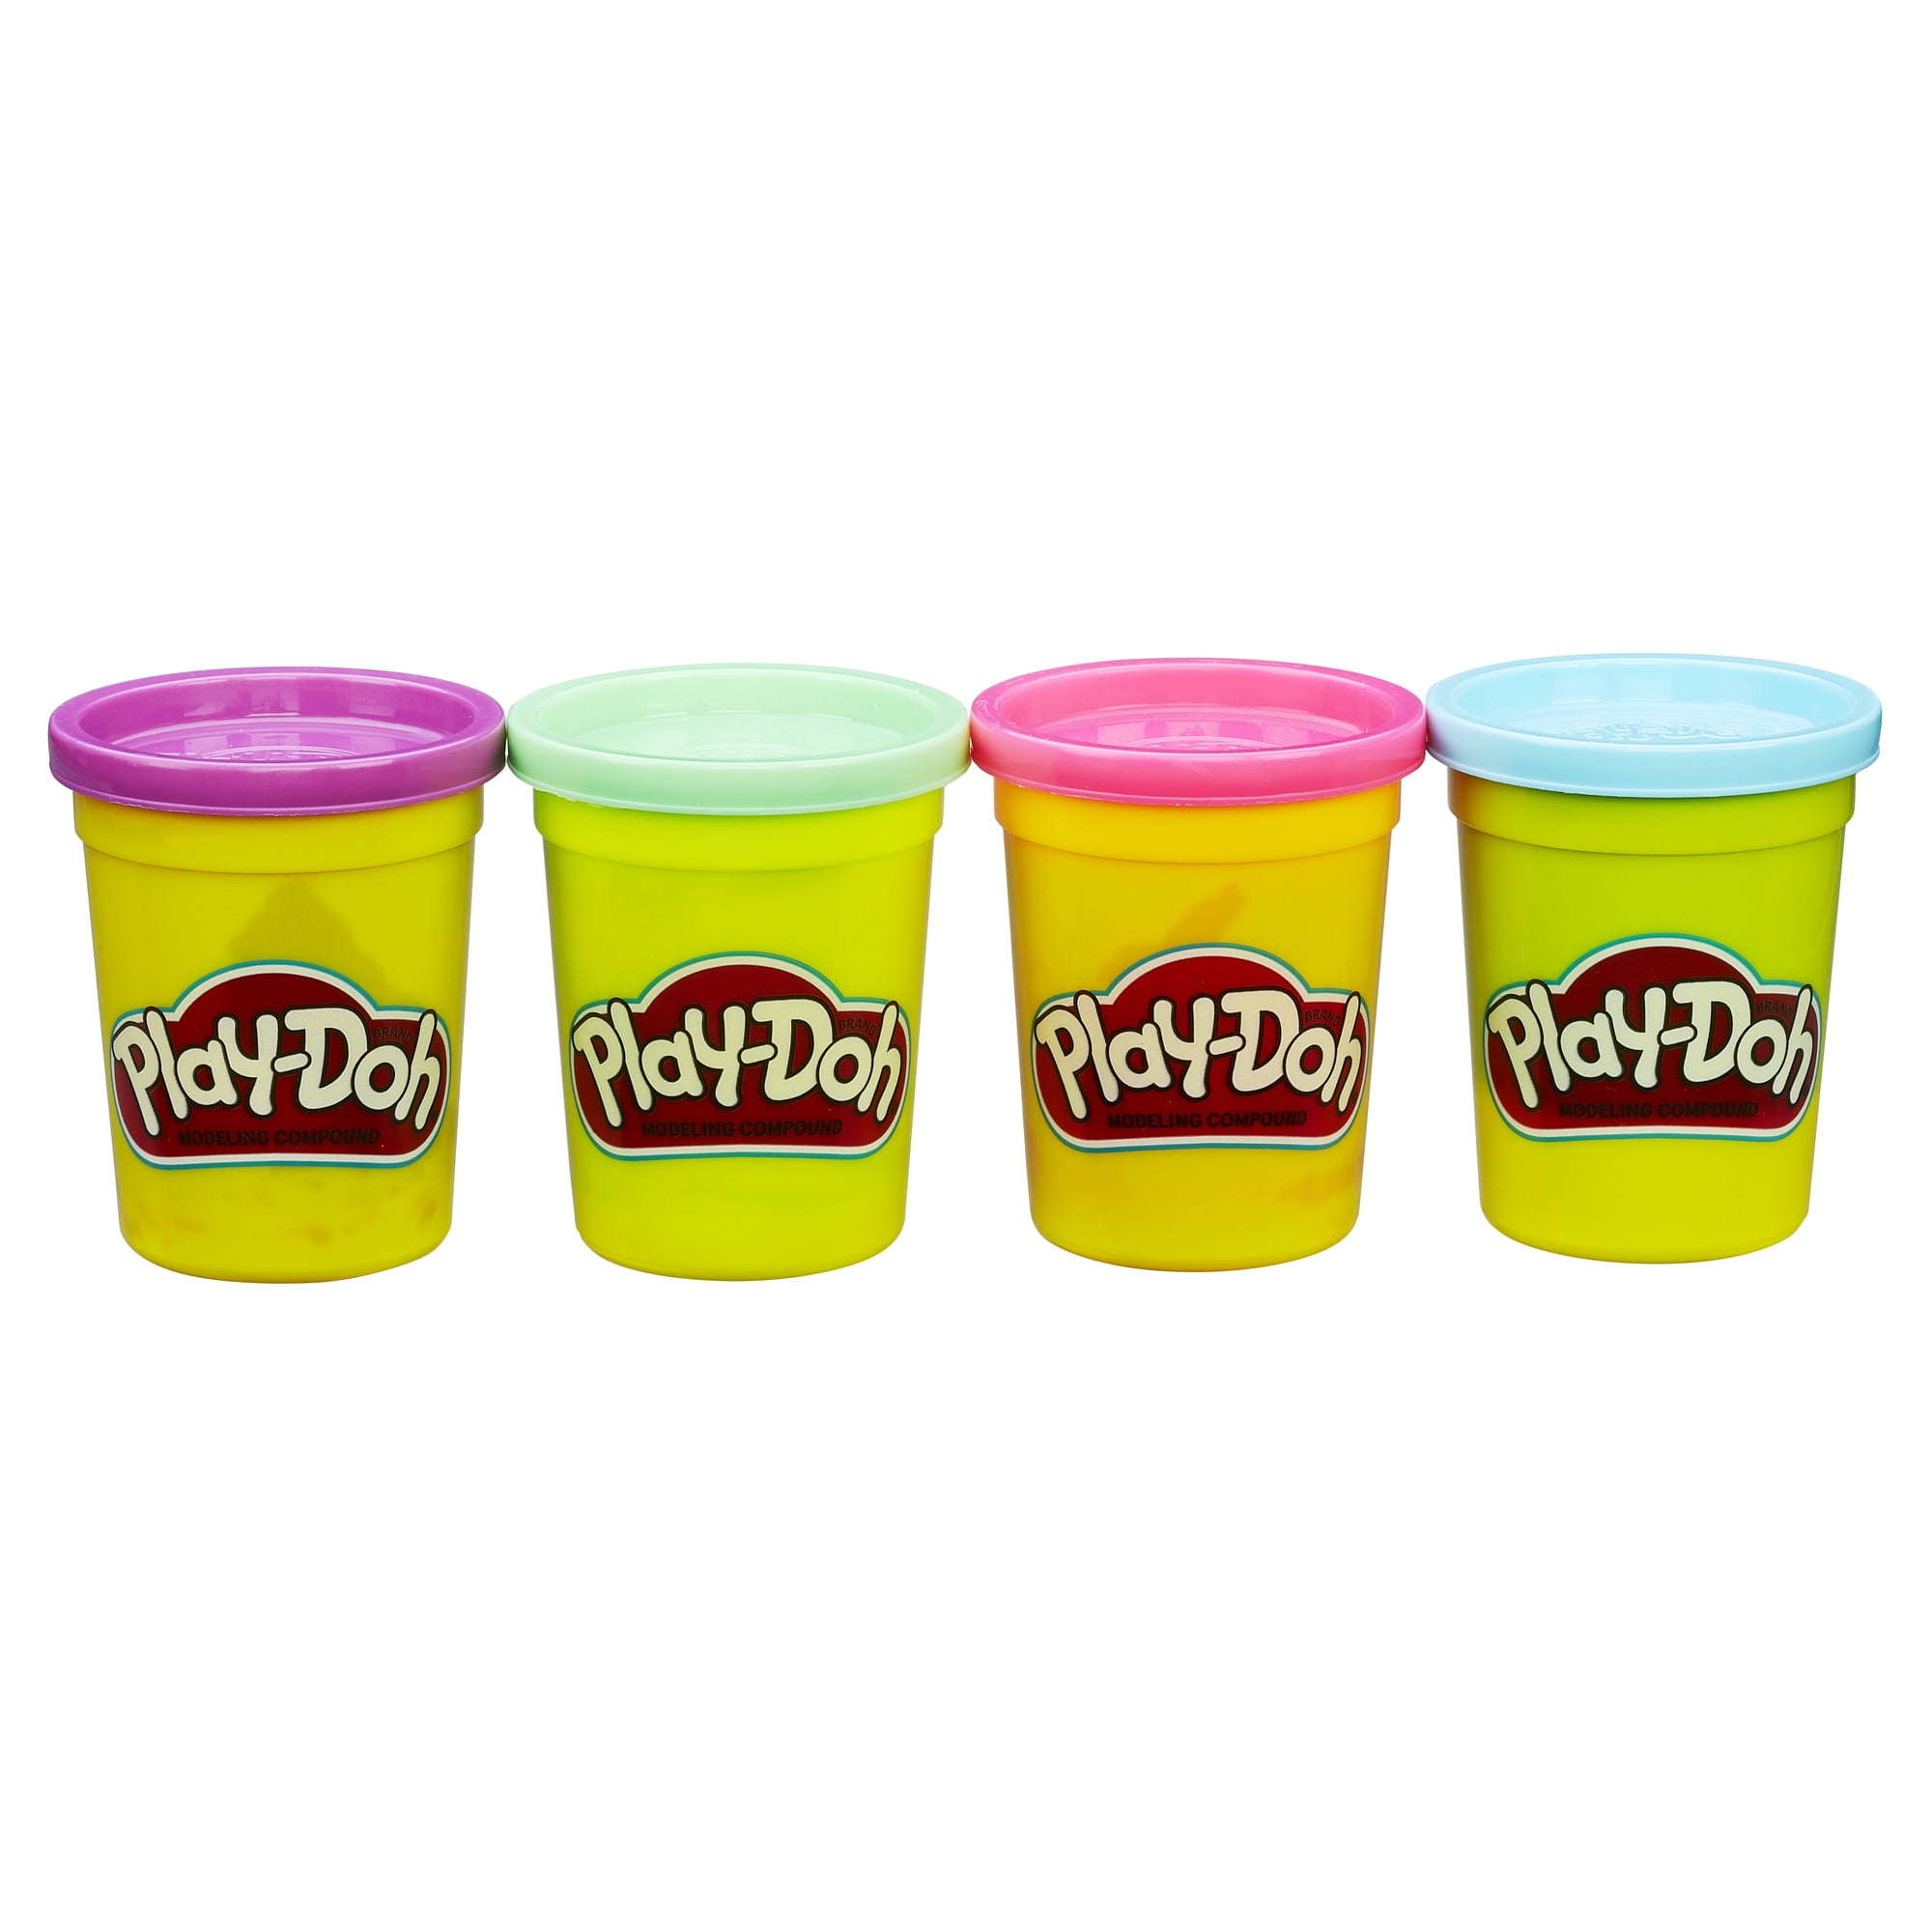 Play-Doh Play dough Glow in Dark glo 4 pack Green Pink Yellow Blue Halloween NEW 